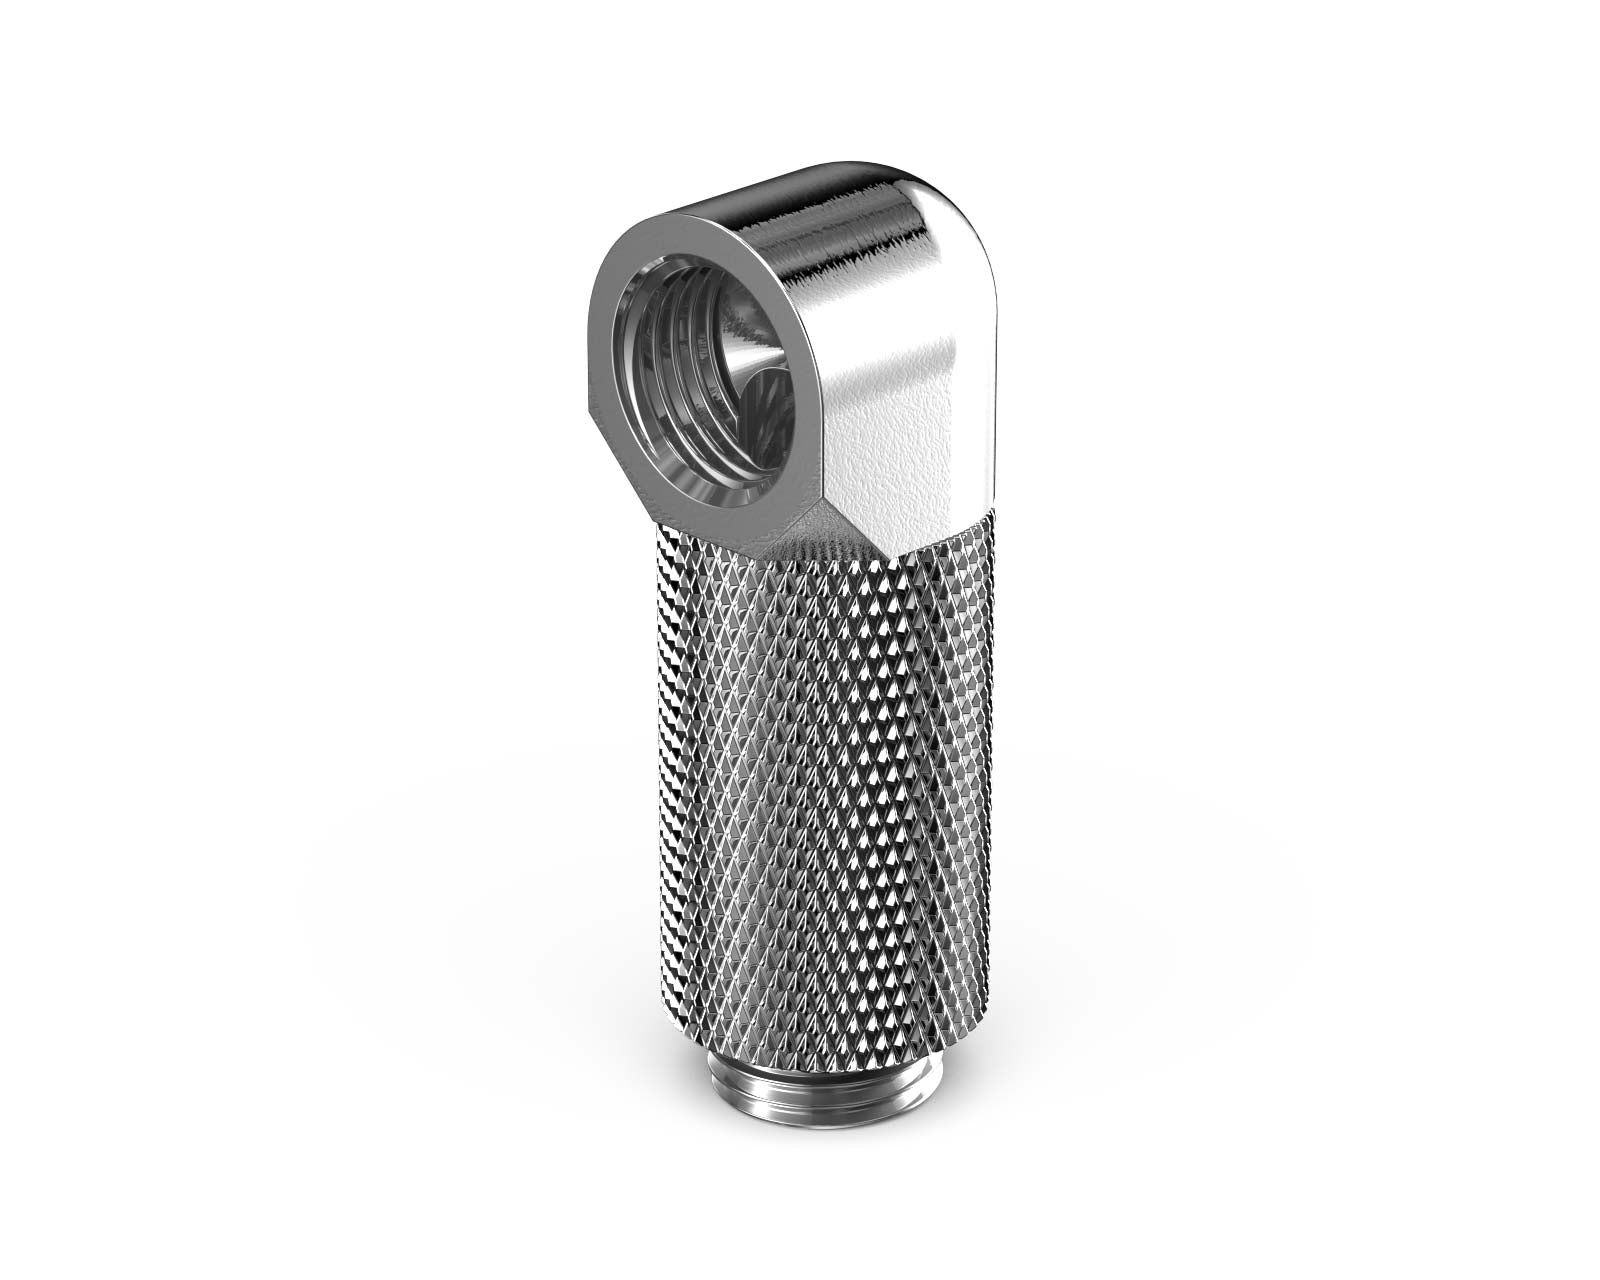 PrimoChill Male to Female G 1/4in. 90 Degree SX Rotary 30mm Extension Elbow Fitting - PrimoChill - KEEPING IT COOL Silver Nickel